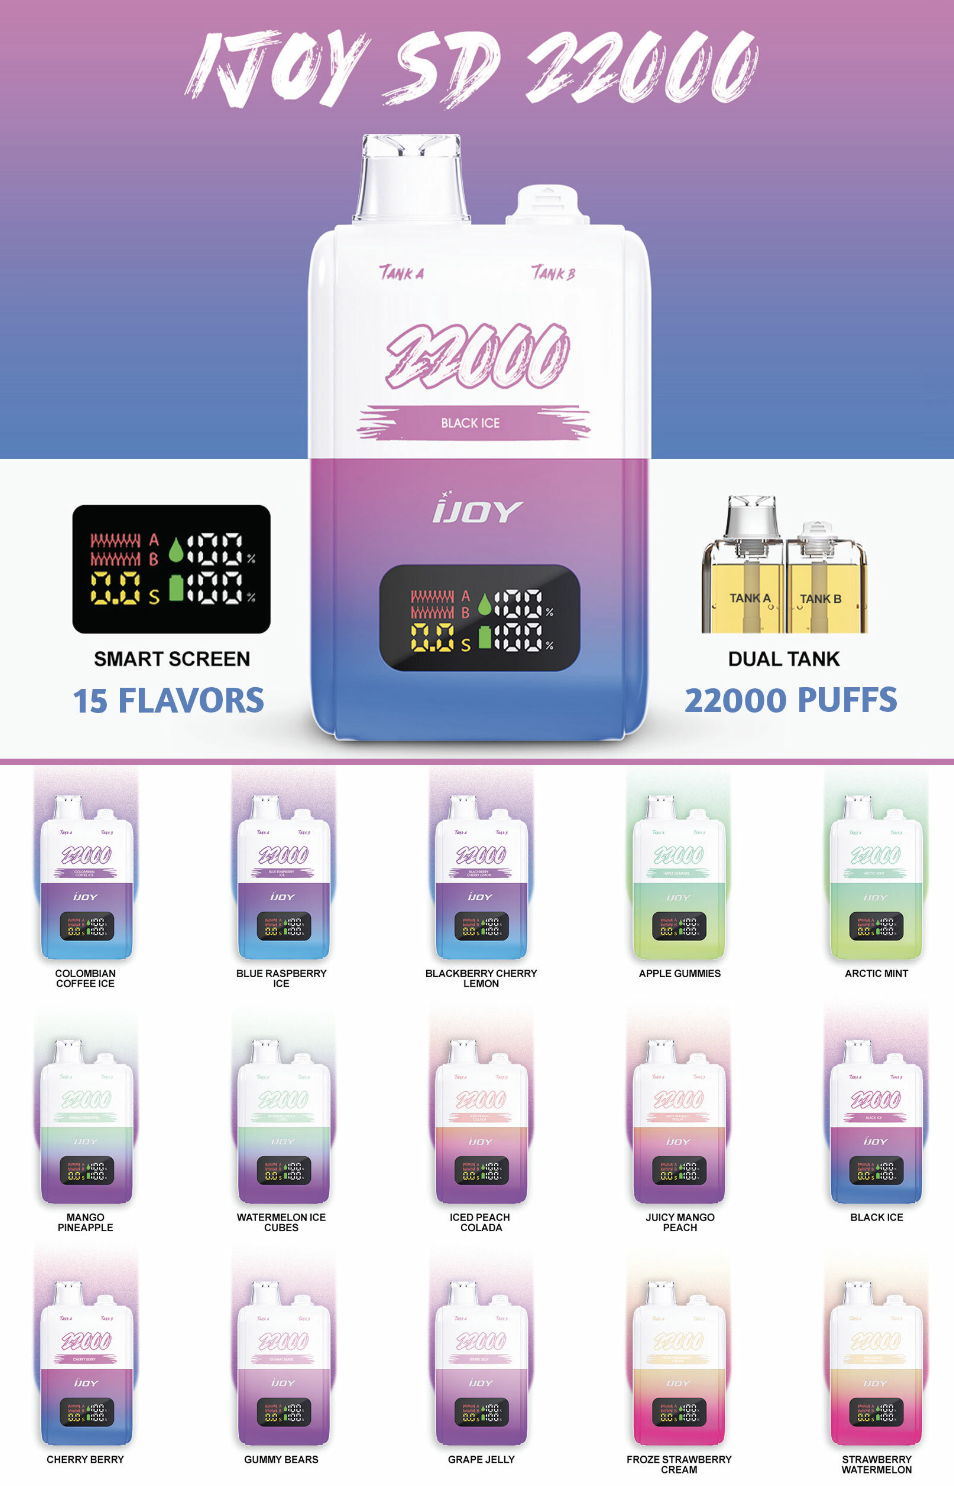 Review Ijoy 22000 puffs